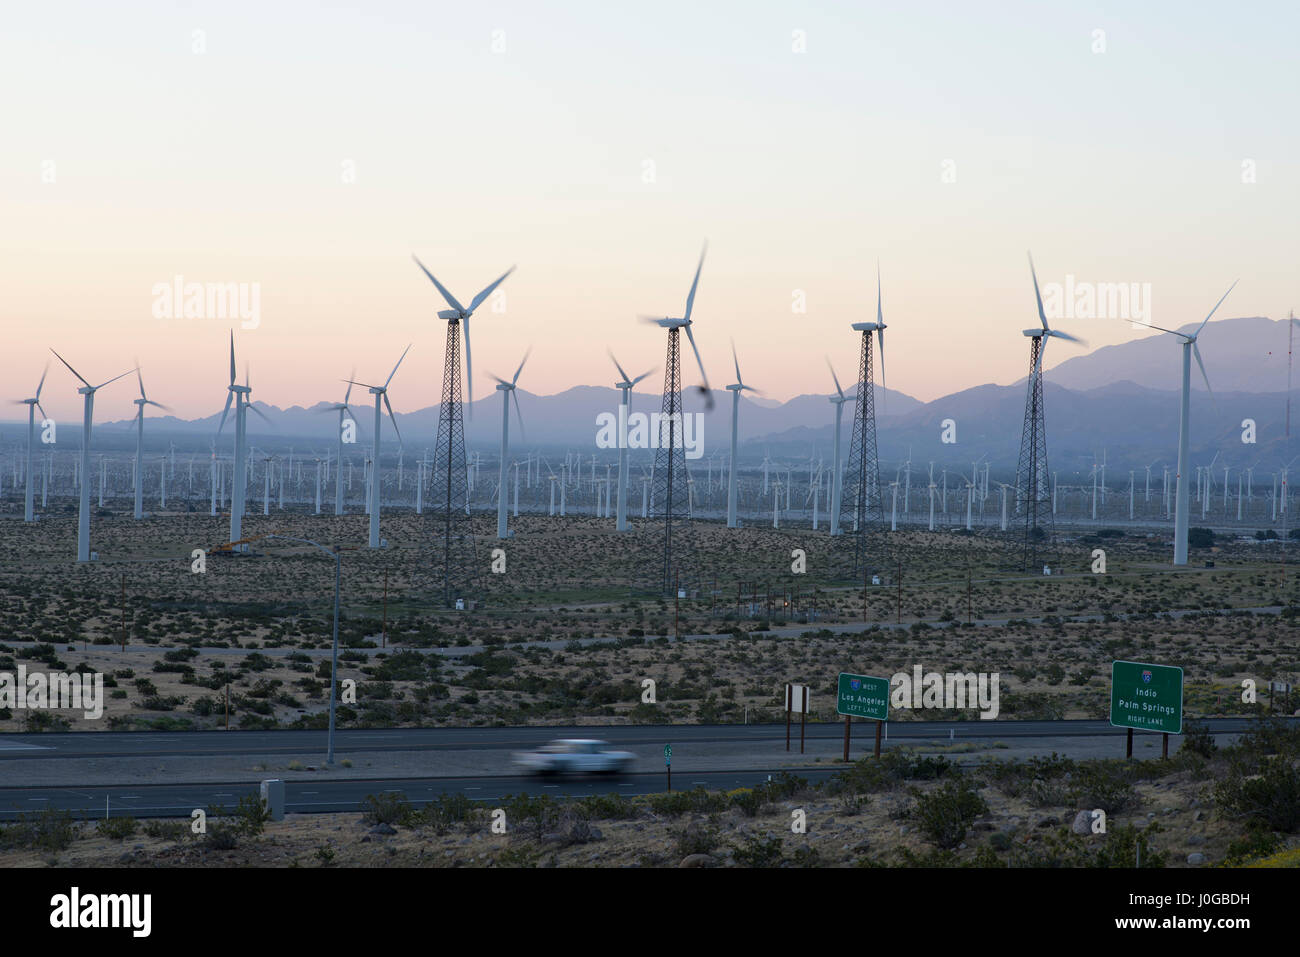 Wind turbines at the San Gorgonio Pass Wind Farm, Southern California, USA. Highway 62 in the foreground. Stock Photo